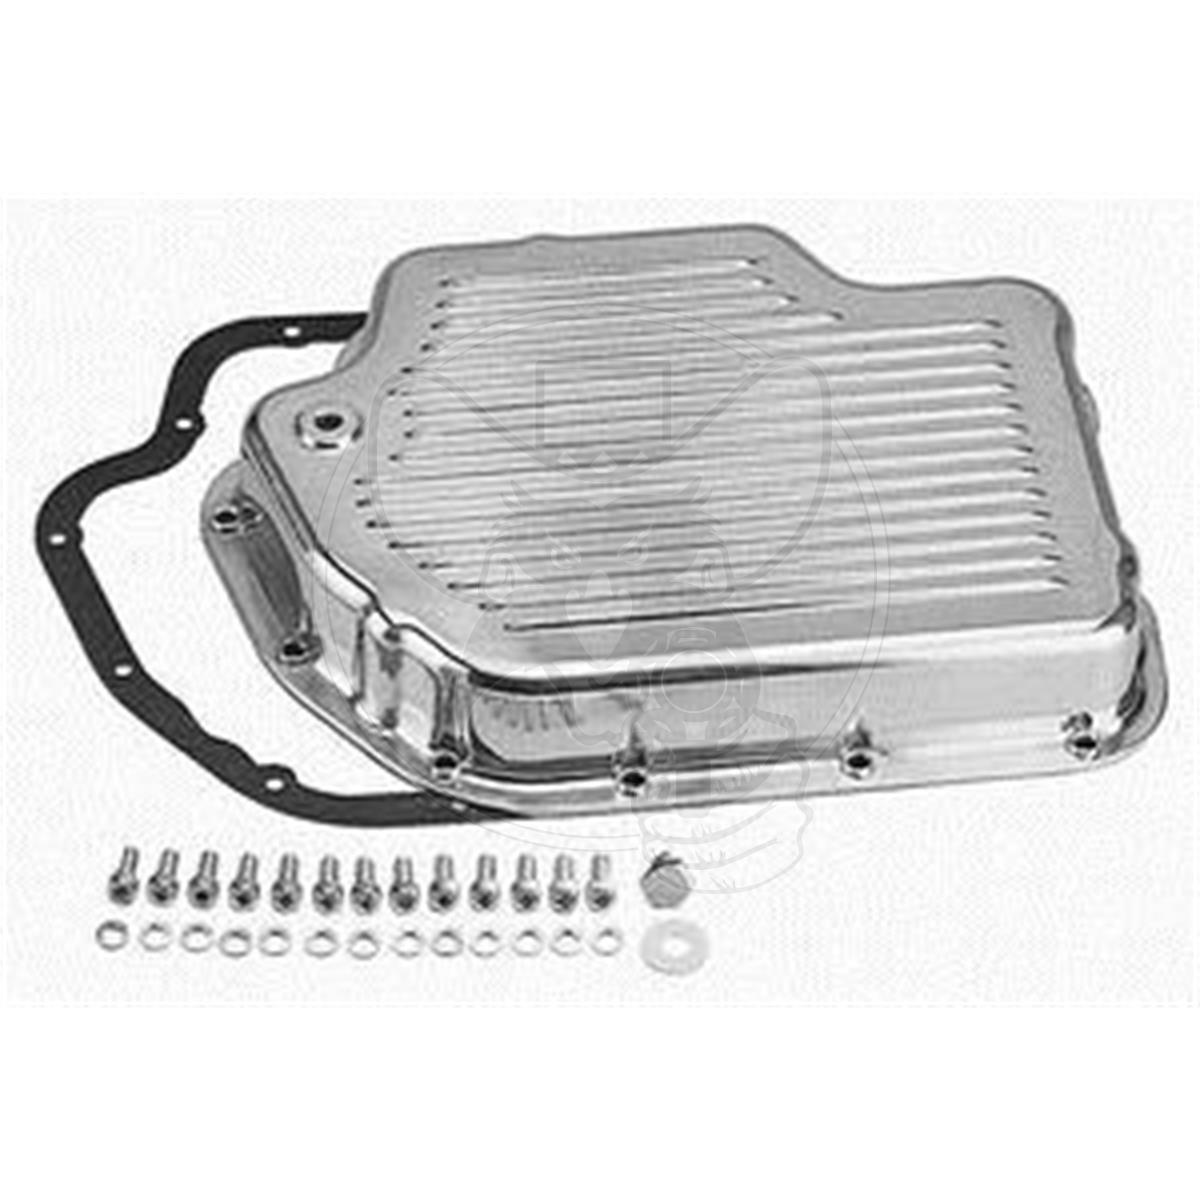 RPC TRANSMISSION PAN TURBO 400 POLISHED FINNED ALLOY STOCK DEPTH